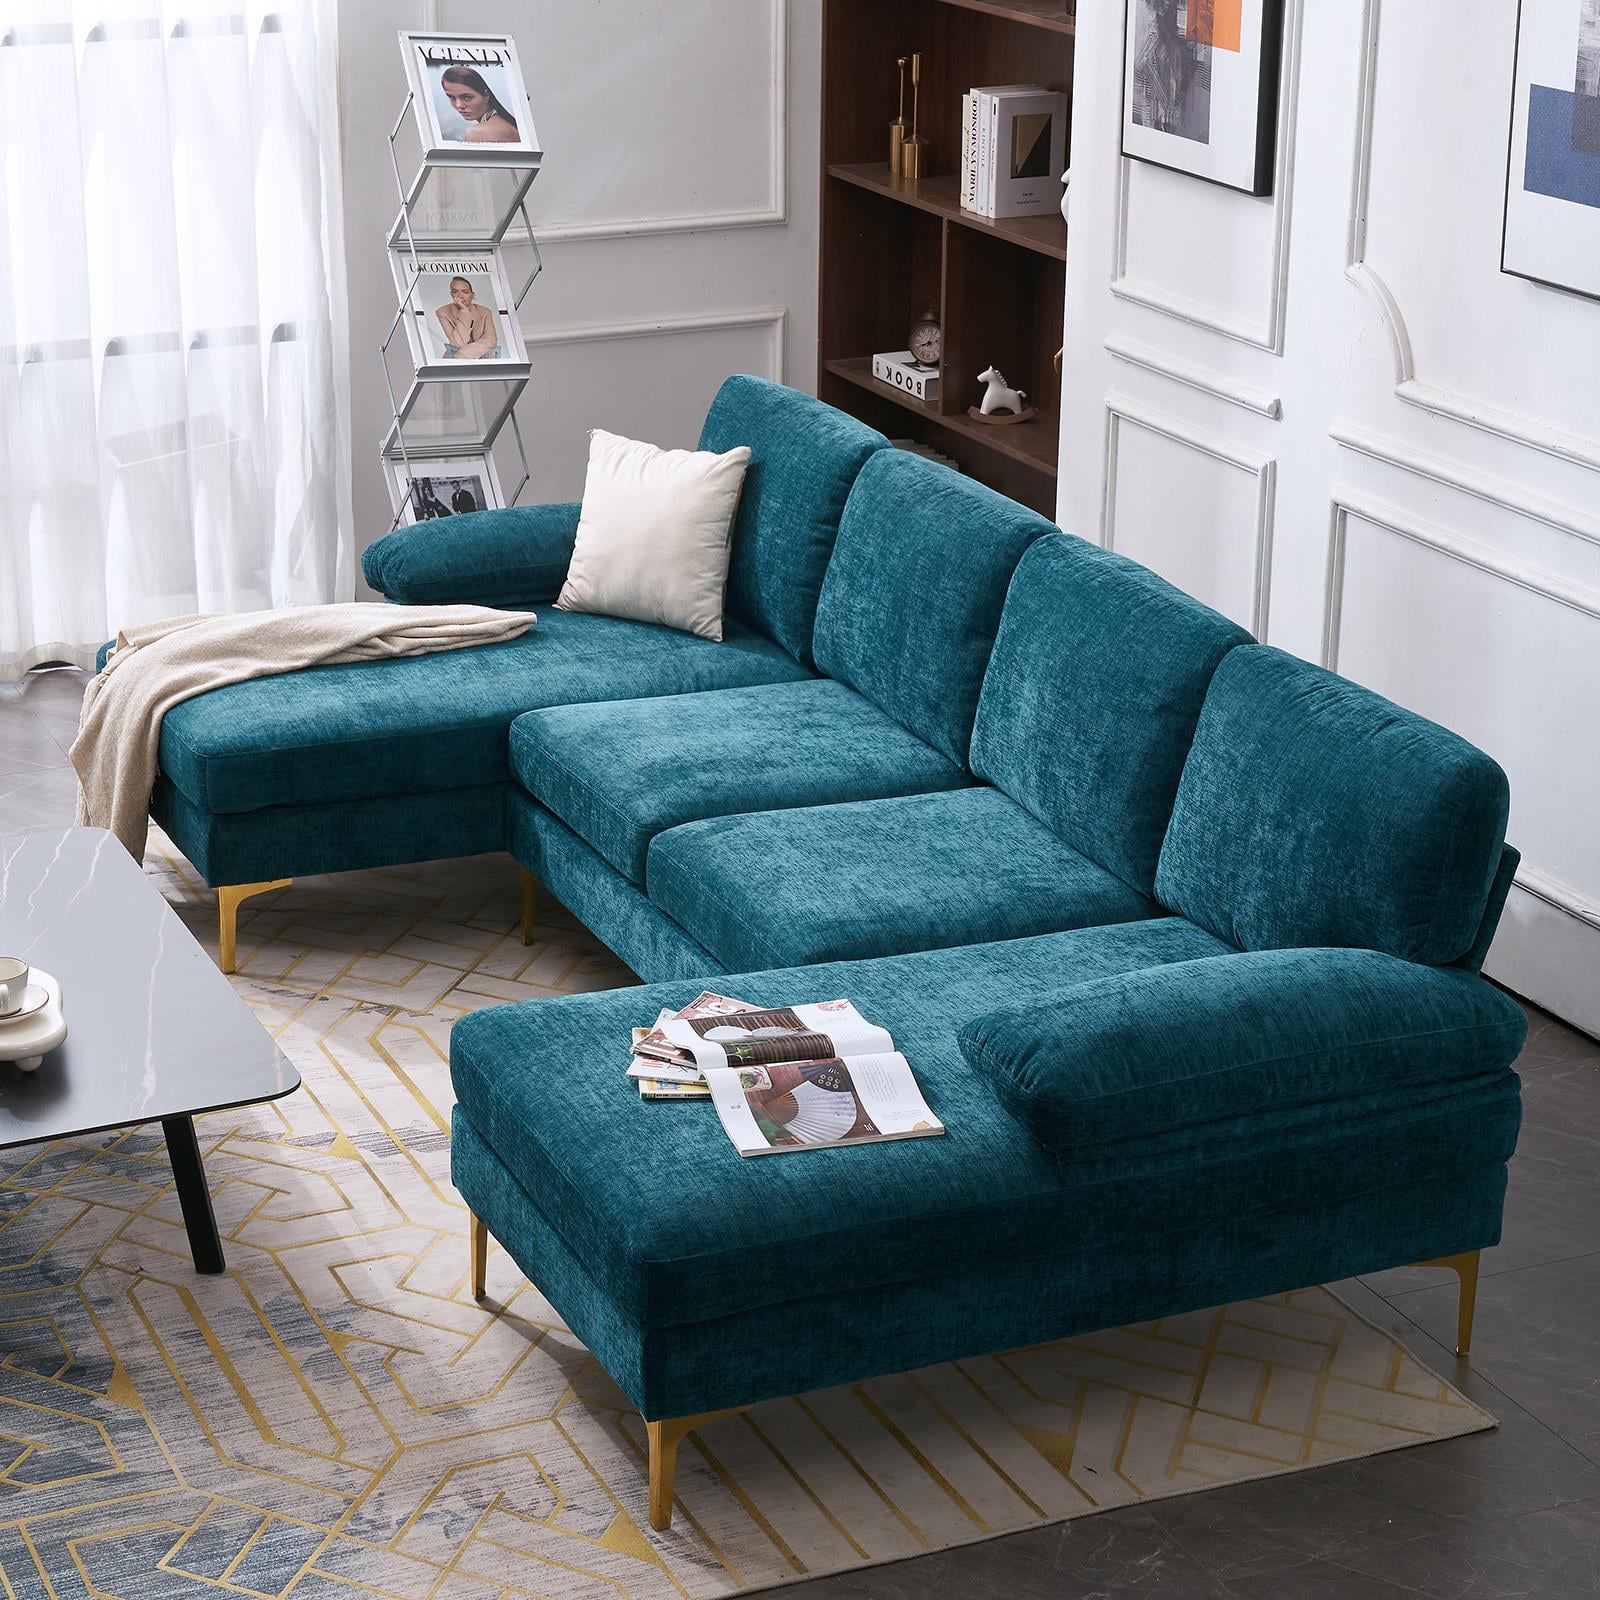 plannen Transparant Liever Ktaxon Modern U-Shape Sectional Sofa, 114" Chenille Fabric Sectional Couch,  Double Wide Chaise Lounge Couch with Metal Feet Blue-Green - Walmart.com